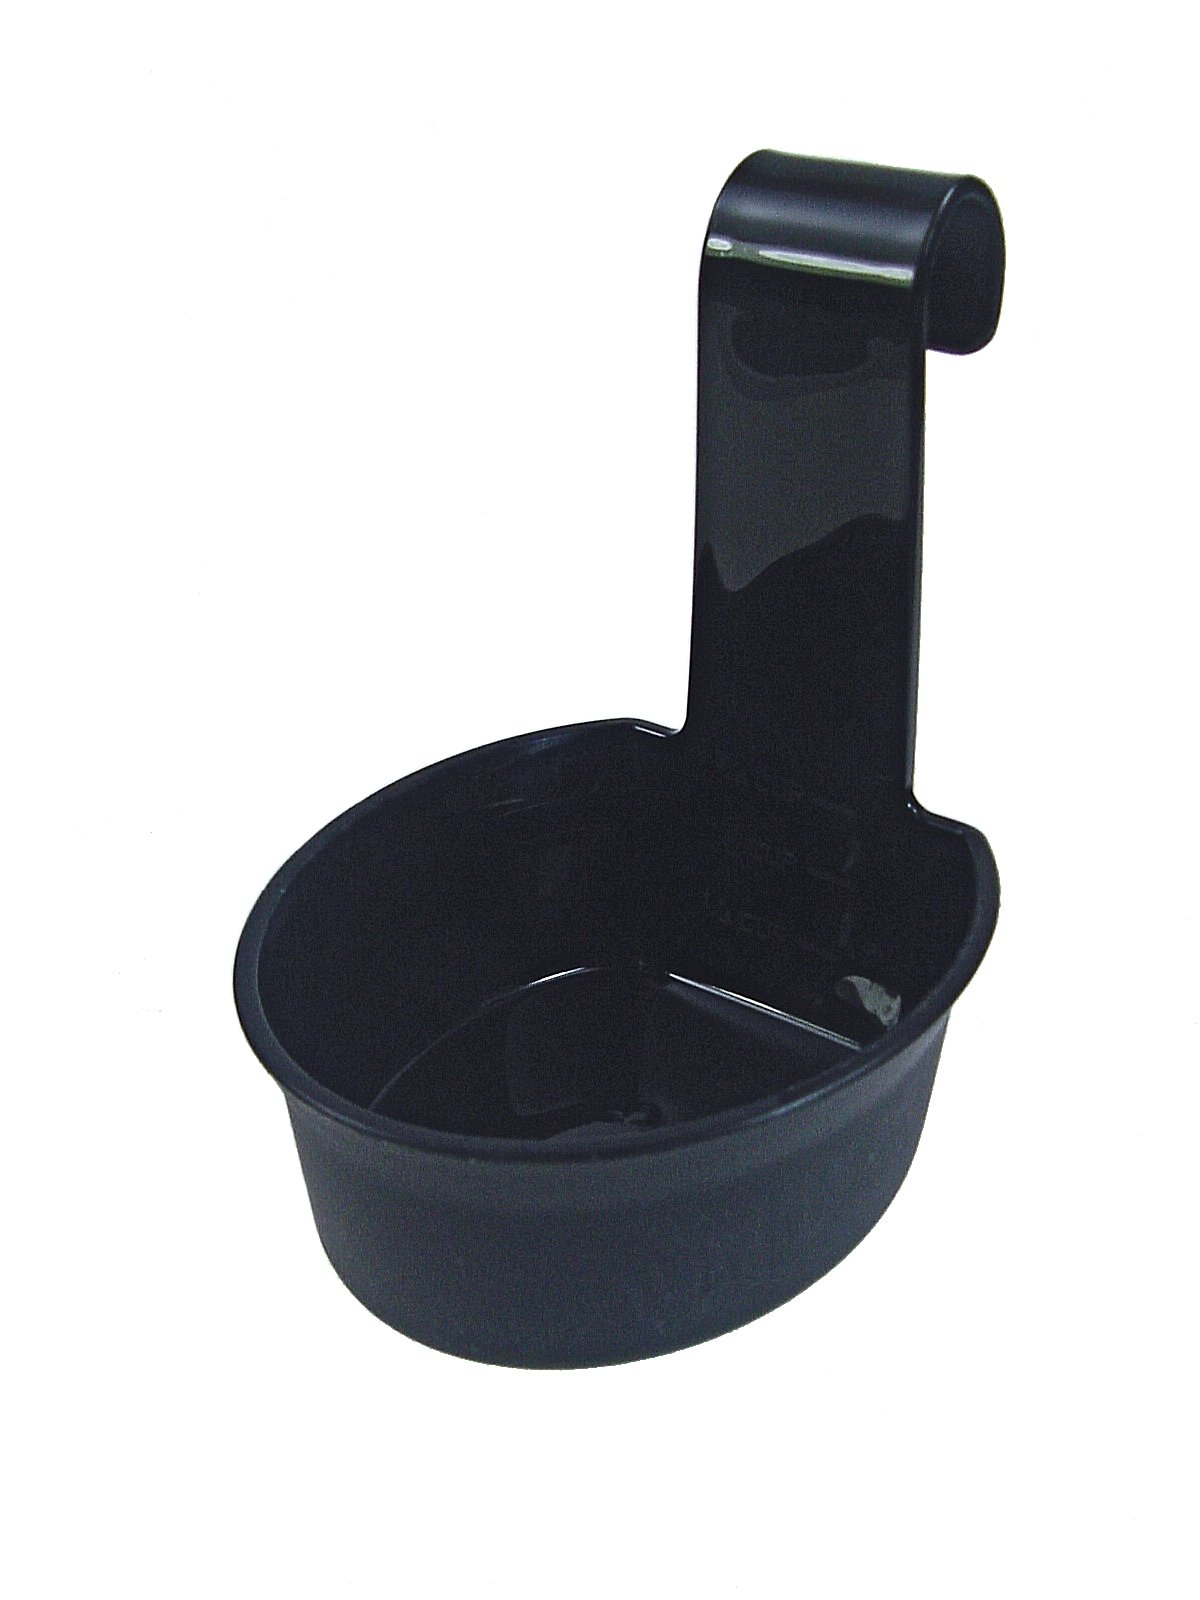 Get parts for Batter Cup